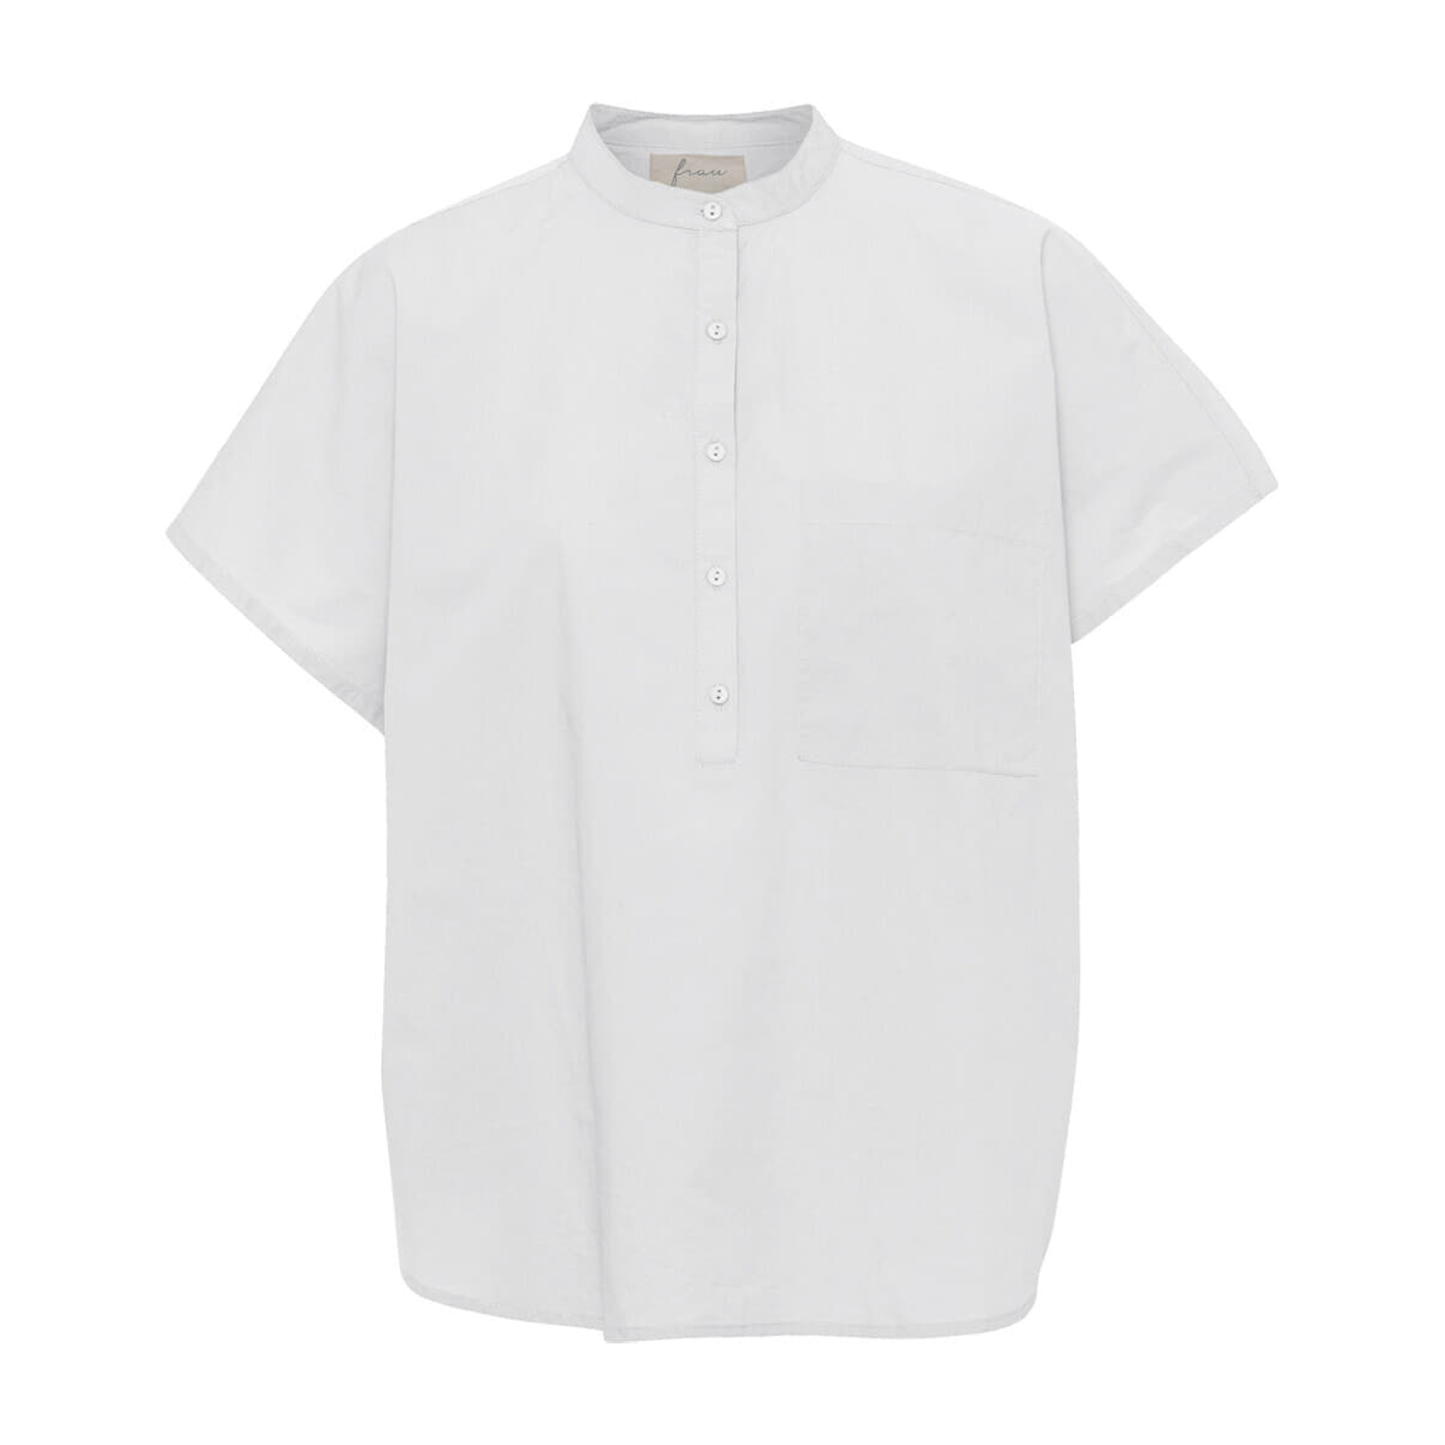 Colombo Top, White